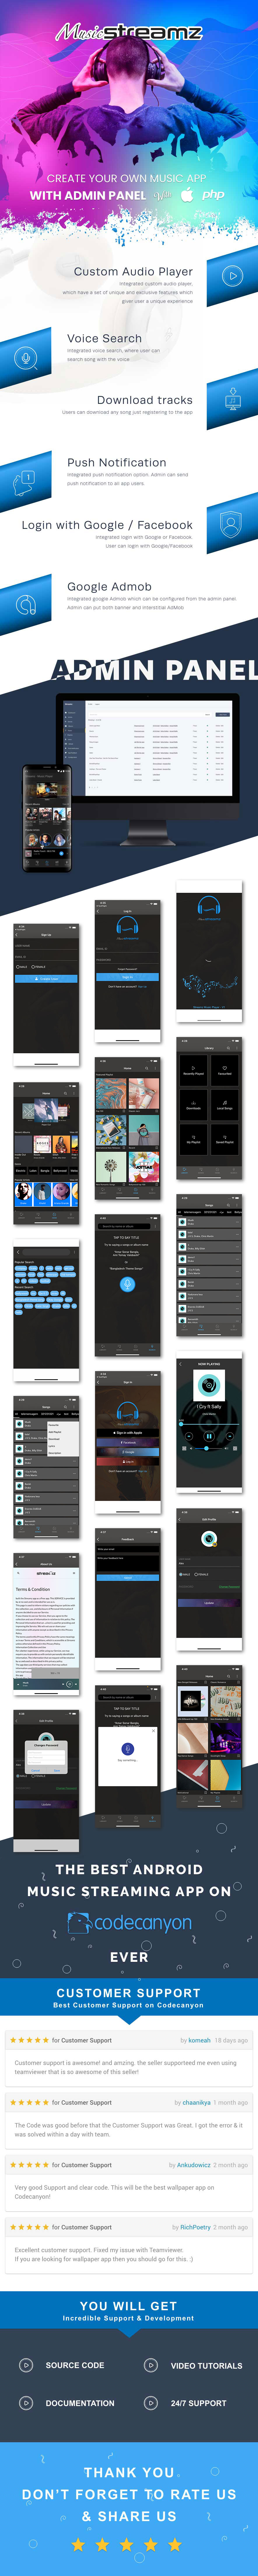 Streamz - A Music Streaming iOS App with Admin Panel - 7